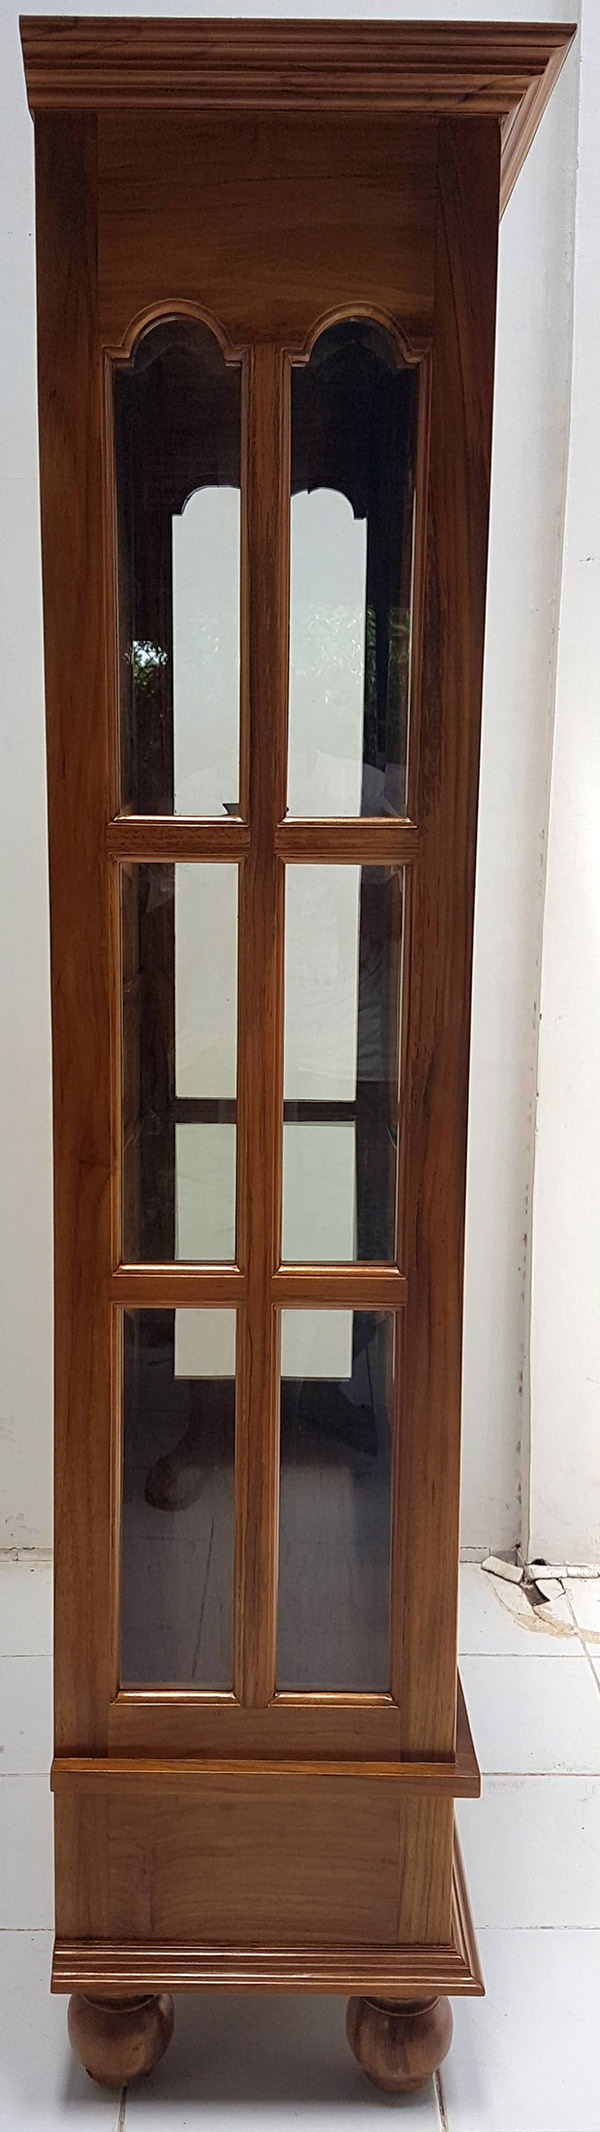 solid teak and glass classic english wardrobe with brown finish